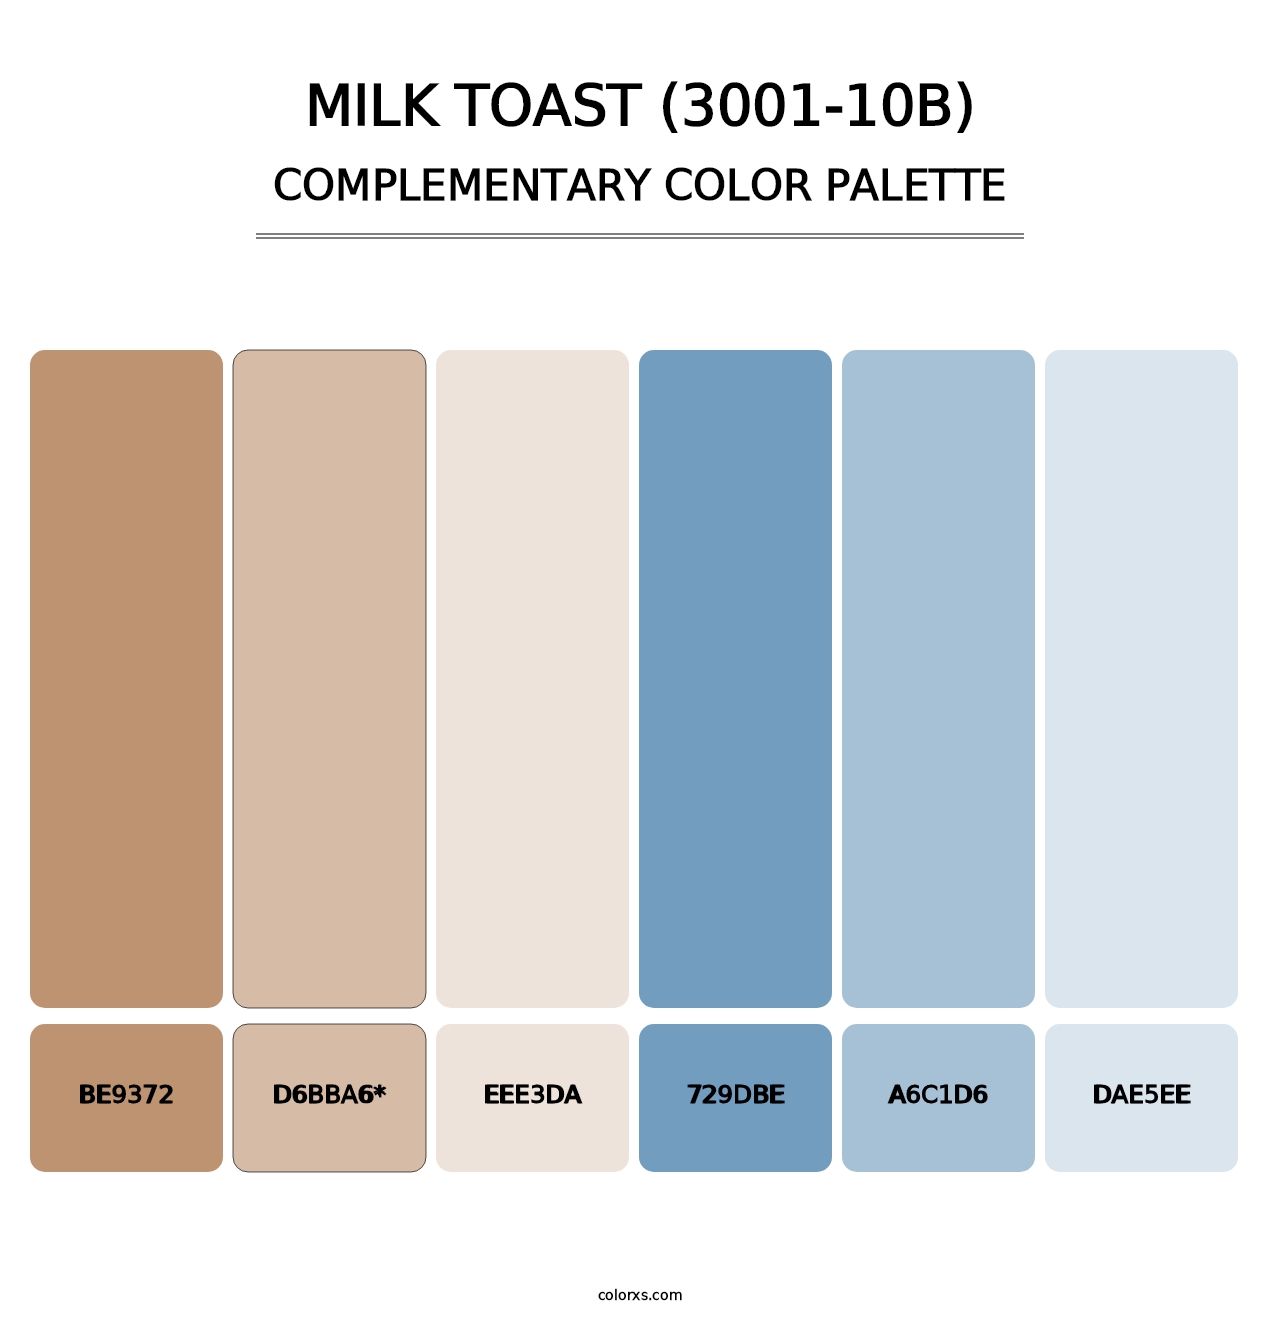 Milk Toast (3001-10B) - Complementary Color Palette